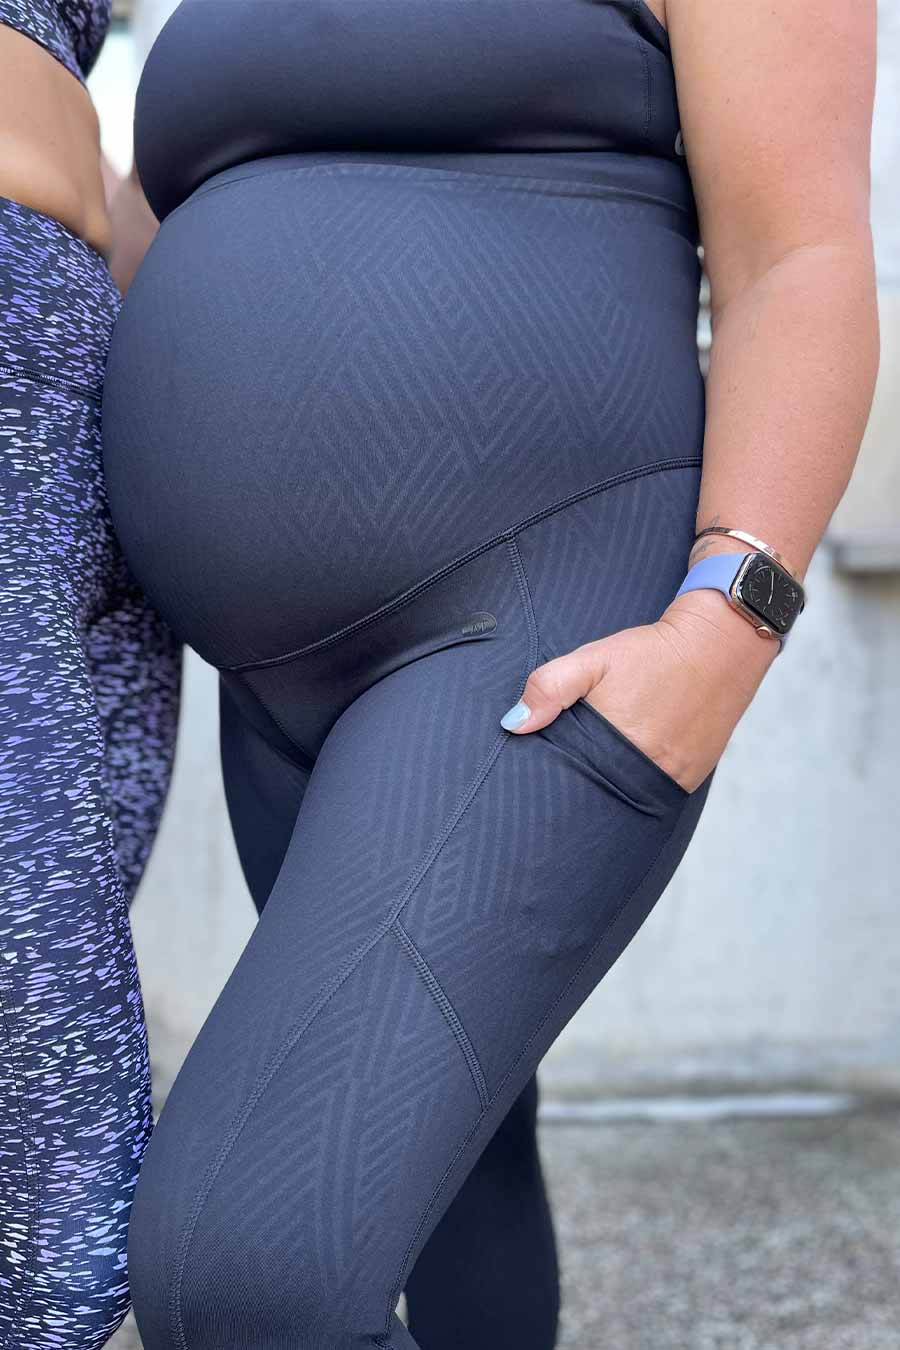 11 Best Maternity Yoga Pants  Leggings Petite Tall  Plus Size  Options  The Confused Millennial